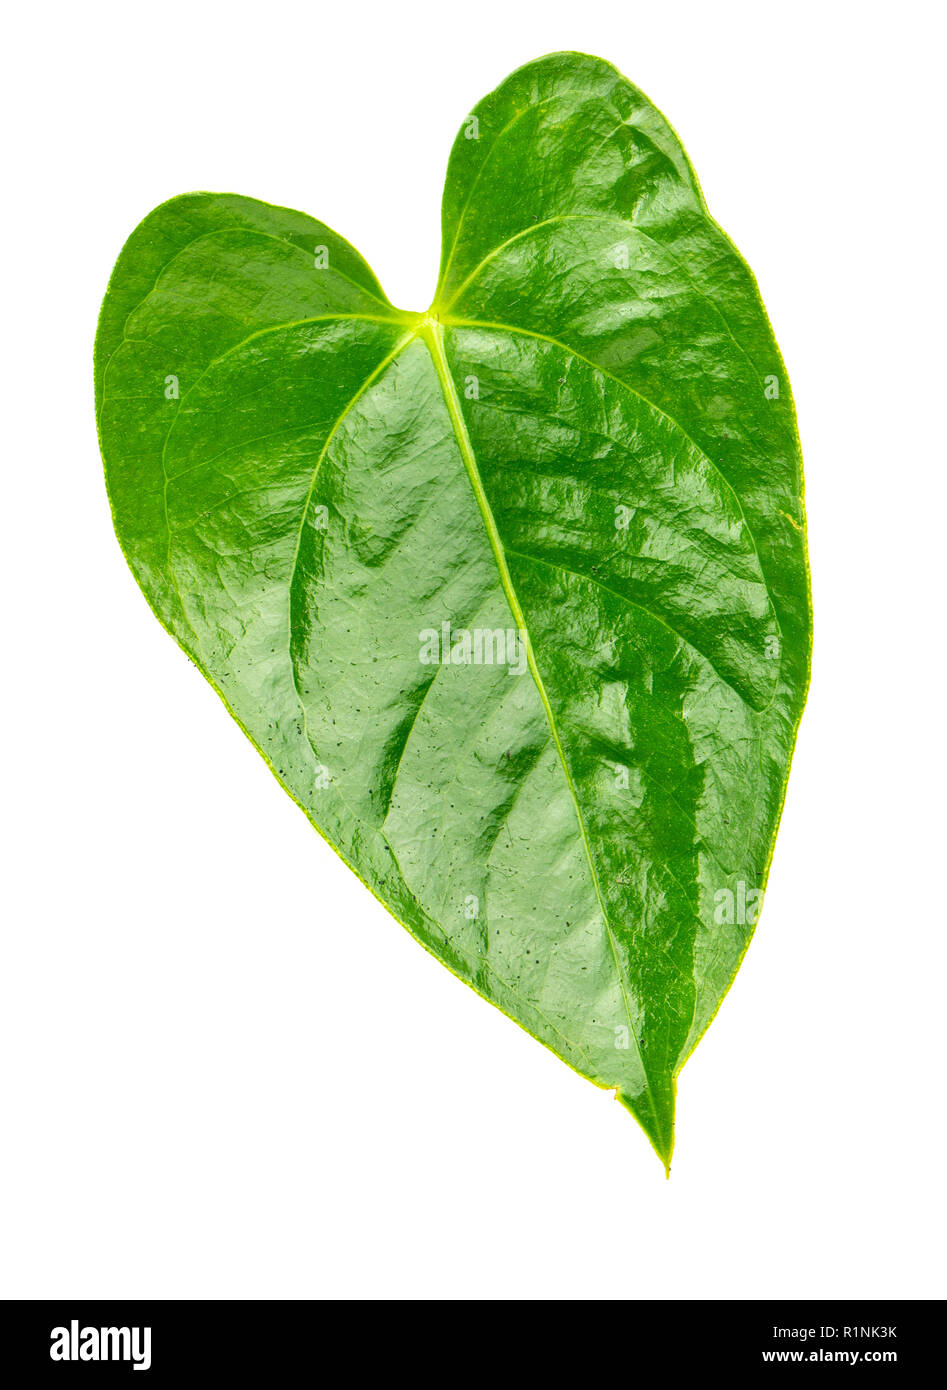 Green leaf of the Anthurium flower isolated on white background Stock Photo